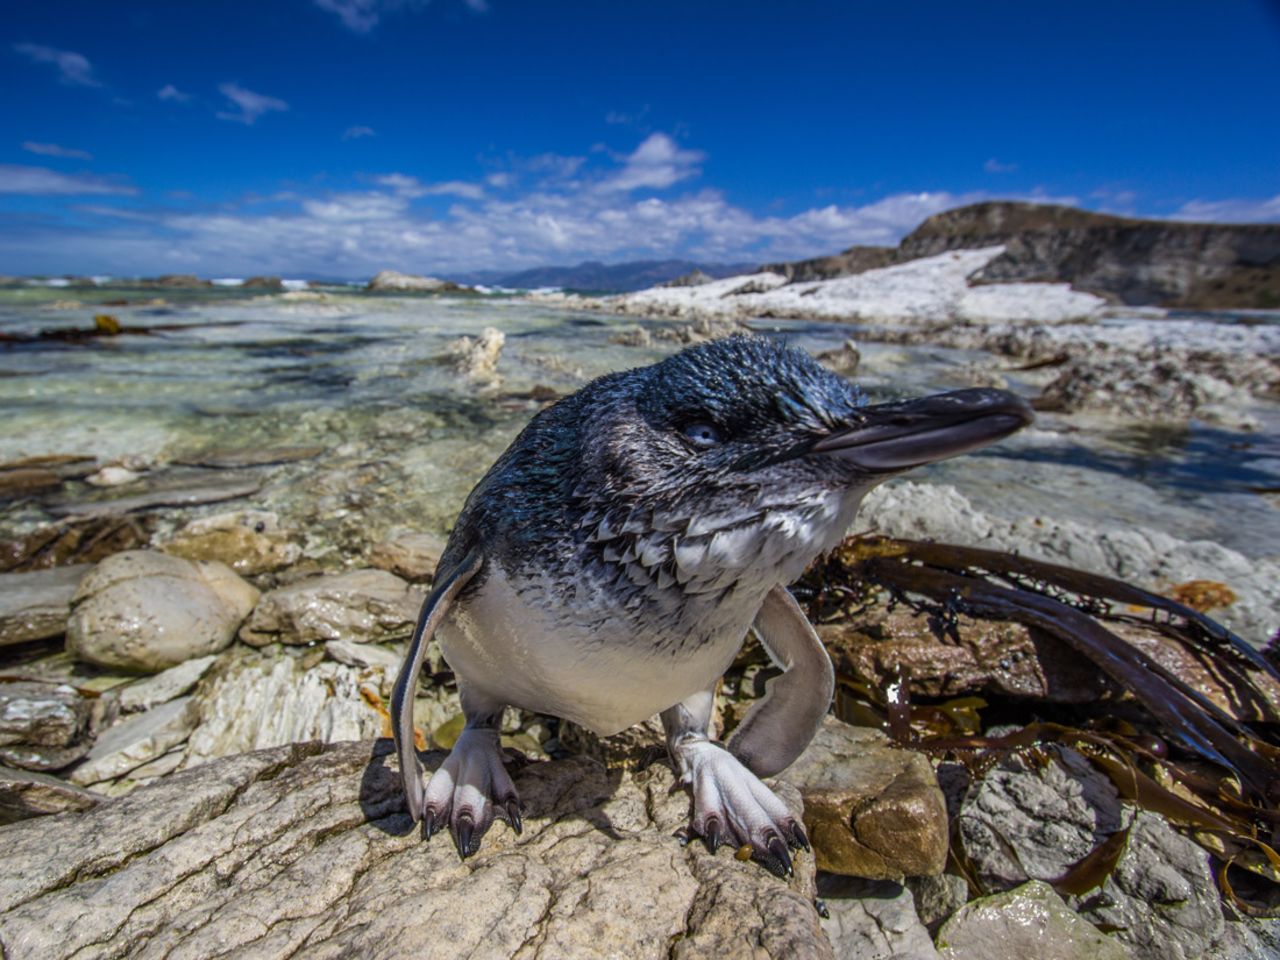 The little penguin, also known as the fairy or blue penguin, can be found on the coasts of New Zealand and southern Australia. They're the smallest of all penguins, weighing just a kilo or two and topping out at just over 30 centimeters tall. 